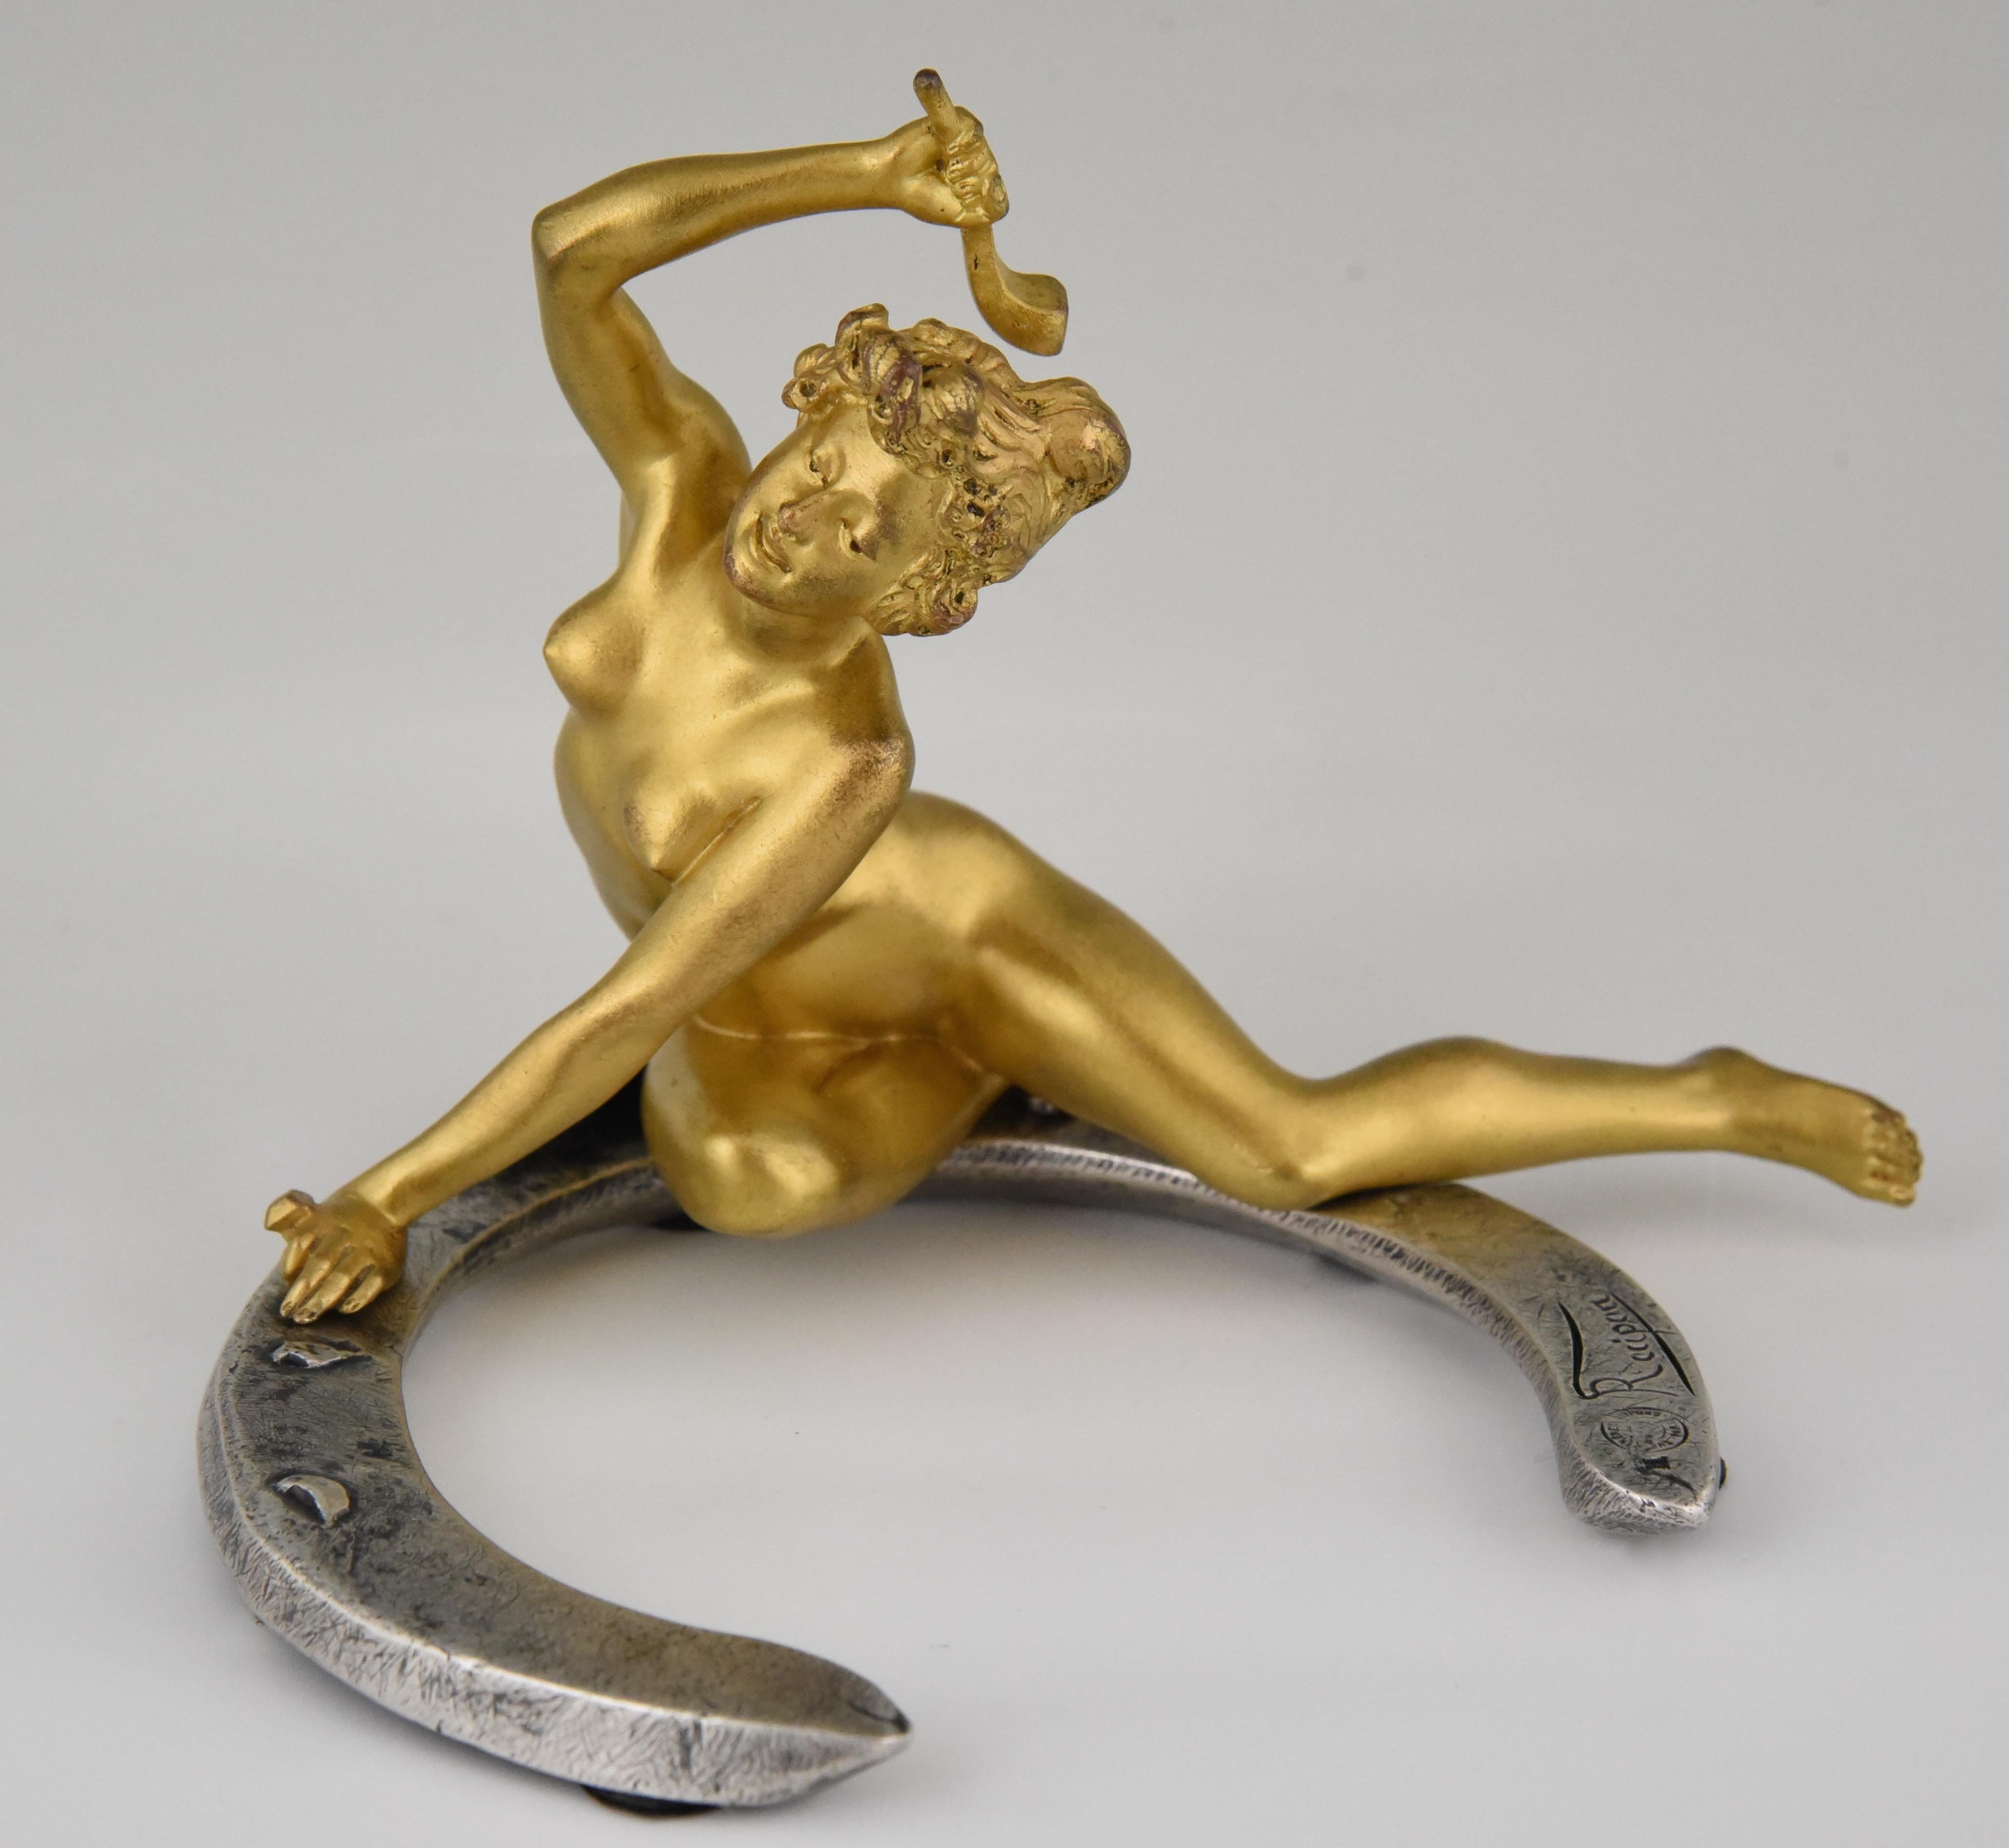 Beautiful Art Nouveau bronze sculpture of a nude sitting on a horseshoe in gilt and silvered bronze. Signed by the French artist Georges Récipon with the Susse Freres foundry seal. France 1896.
This bronze is illustrated in
?